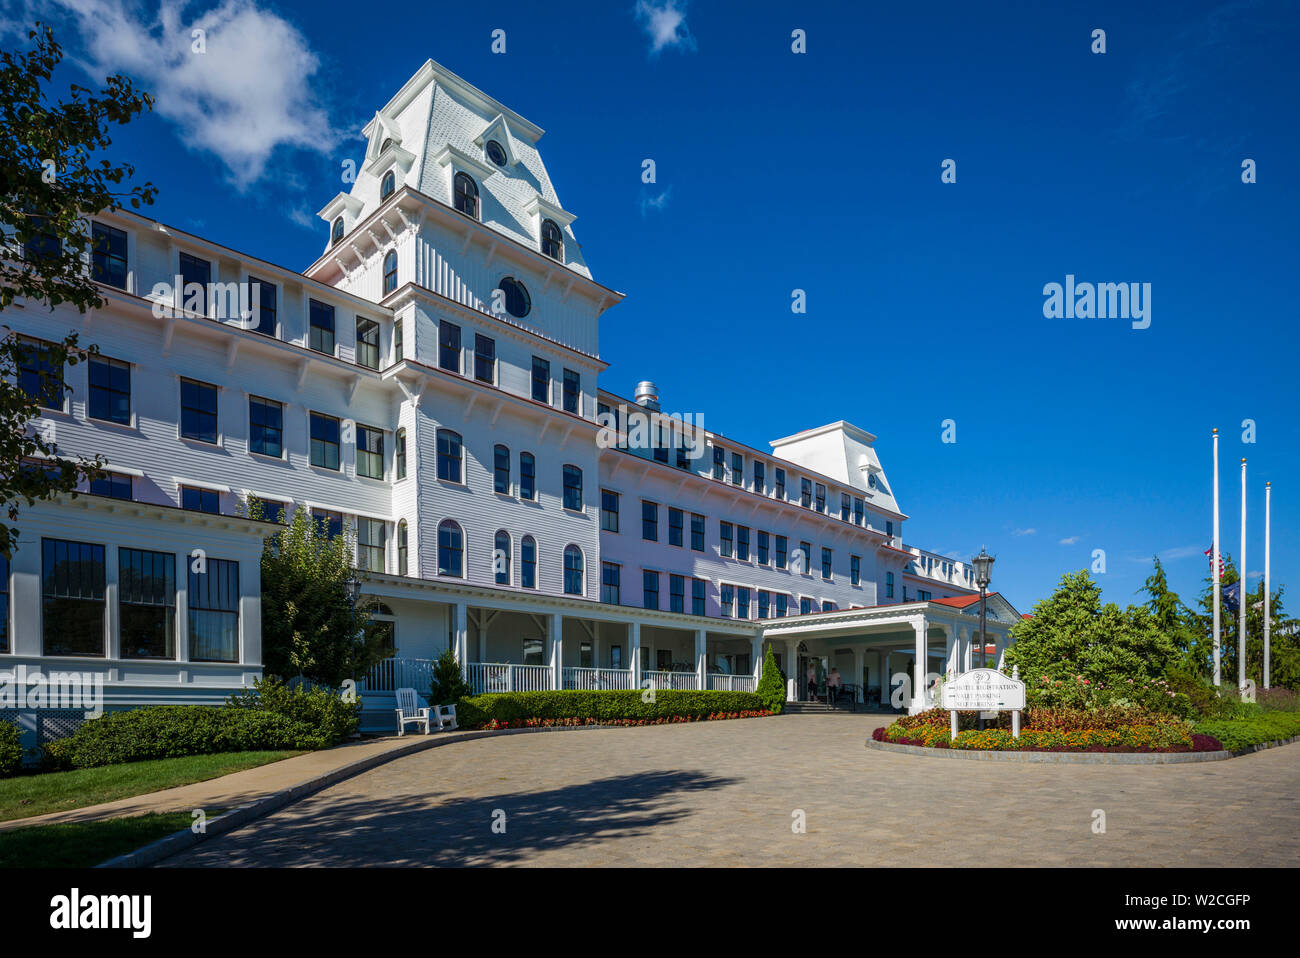 USA, New Hampshire, New Castle, Wentworth By The Sea Resort Stockfoto